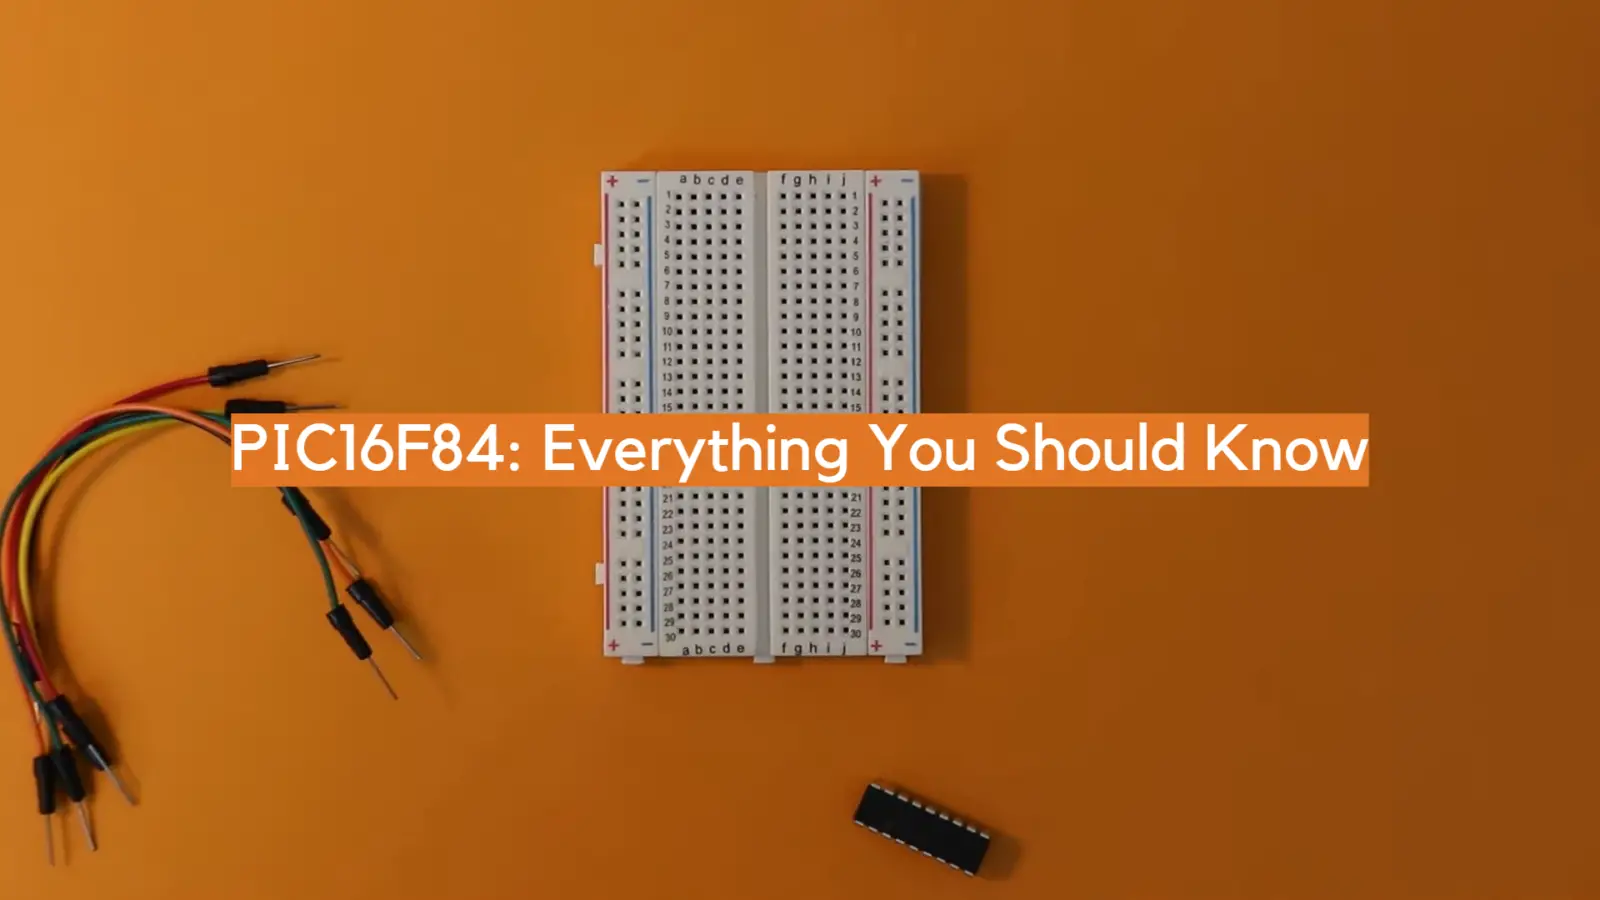 PIC16F84: Everything You Should Know